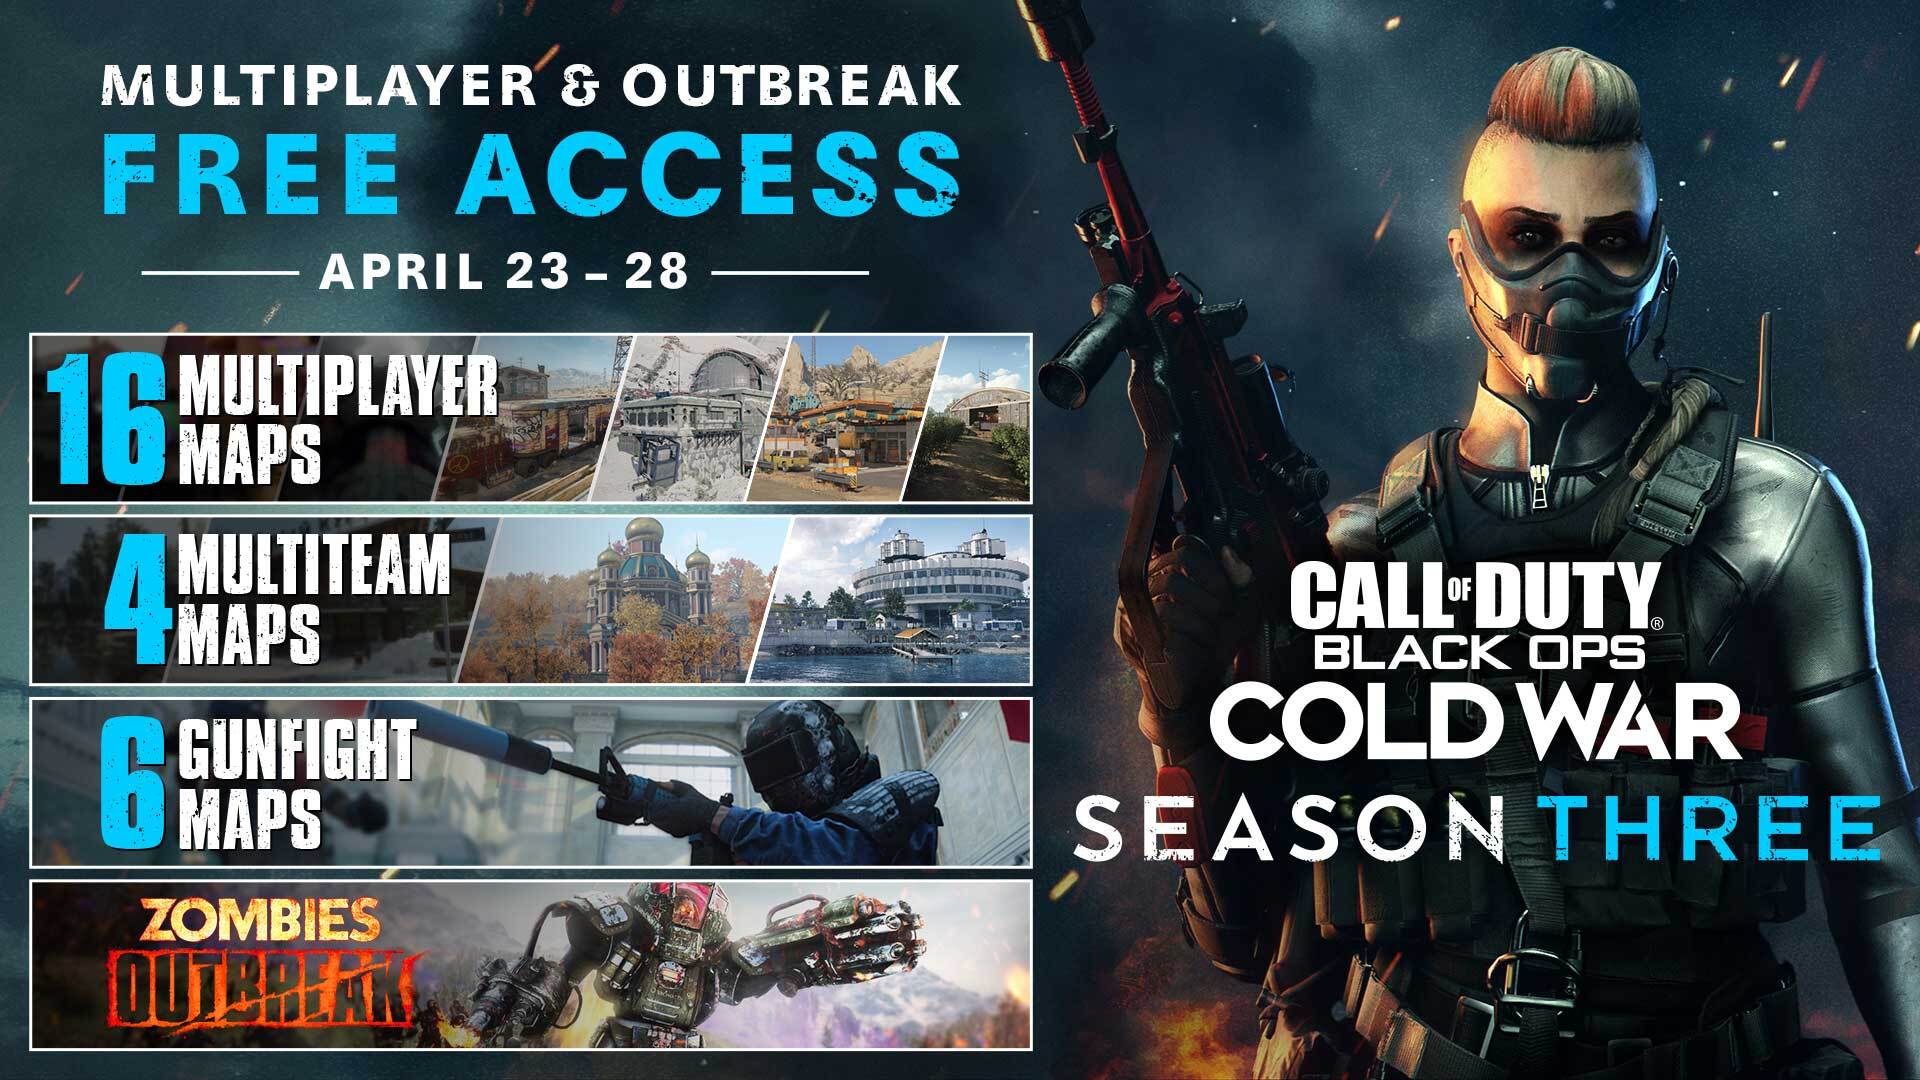 Season Two Reloaded Adds New Multiplayer Maps, Modes, Outbreak